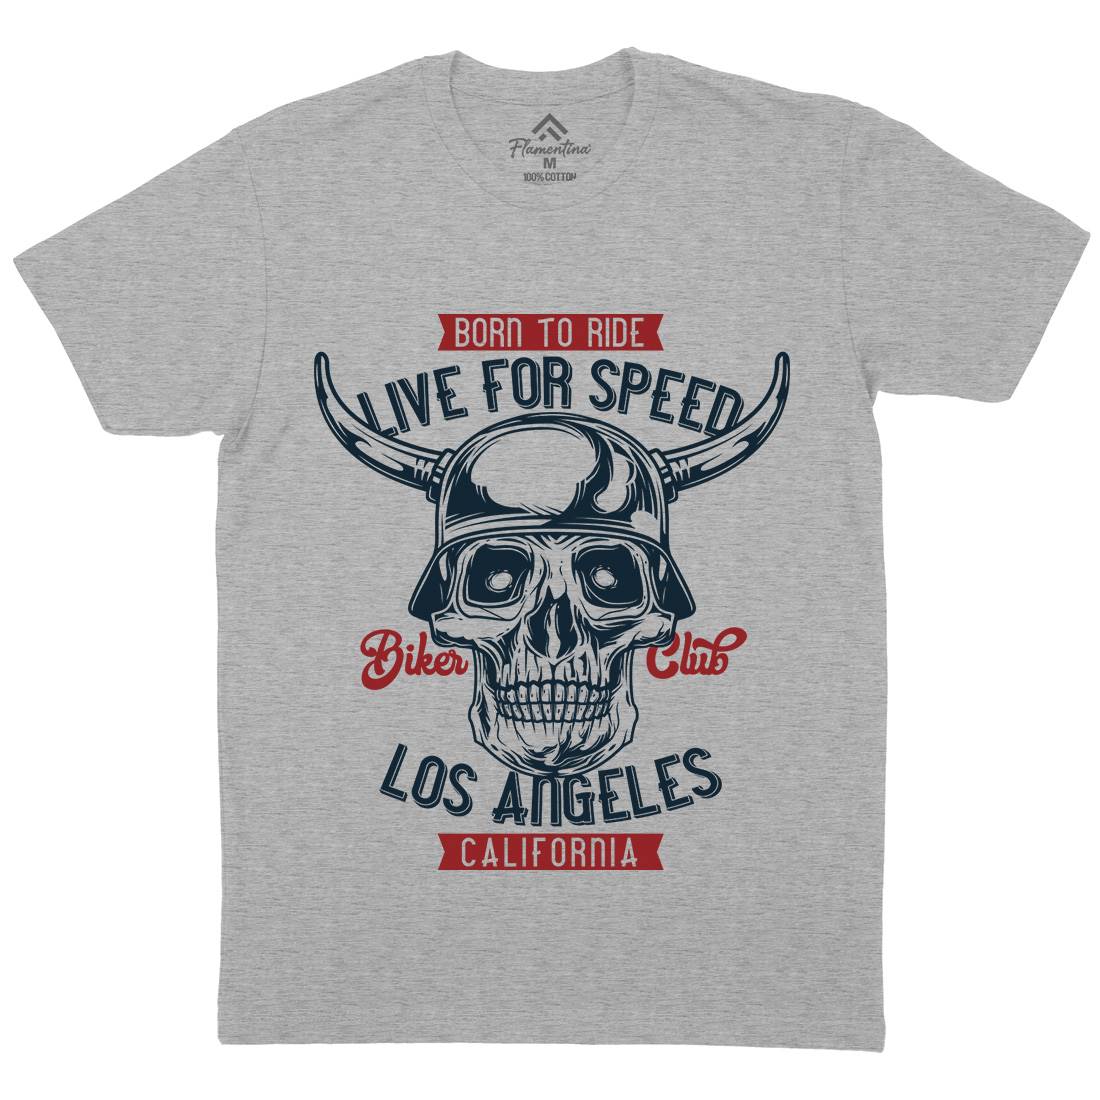 Live For Speed Mens Crew Neck T-Shirt Motorcycles B851